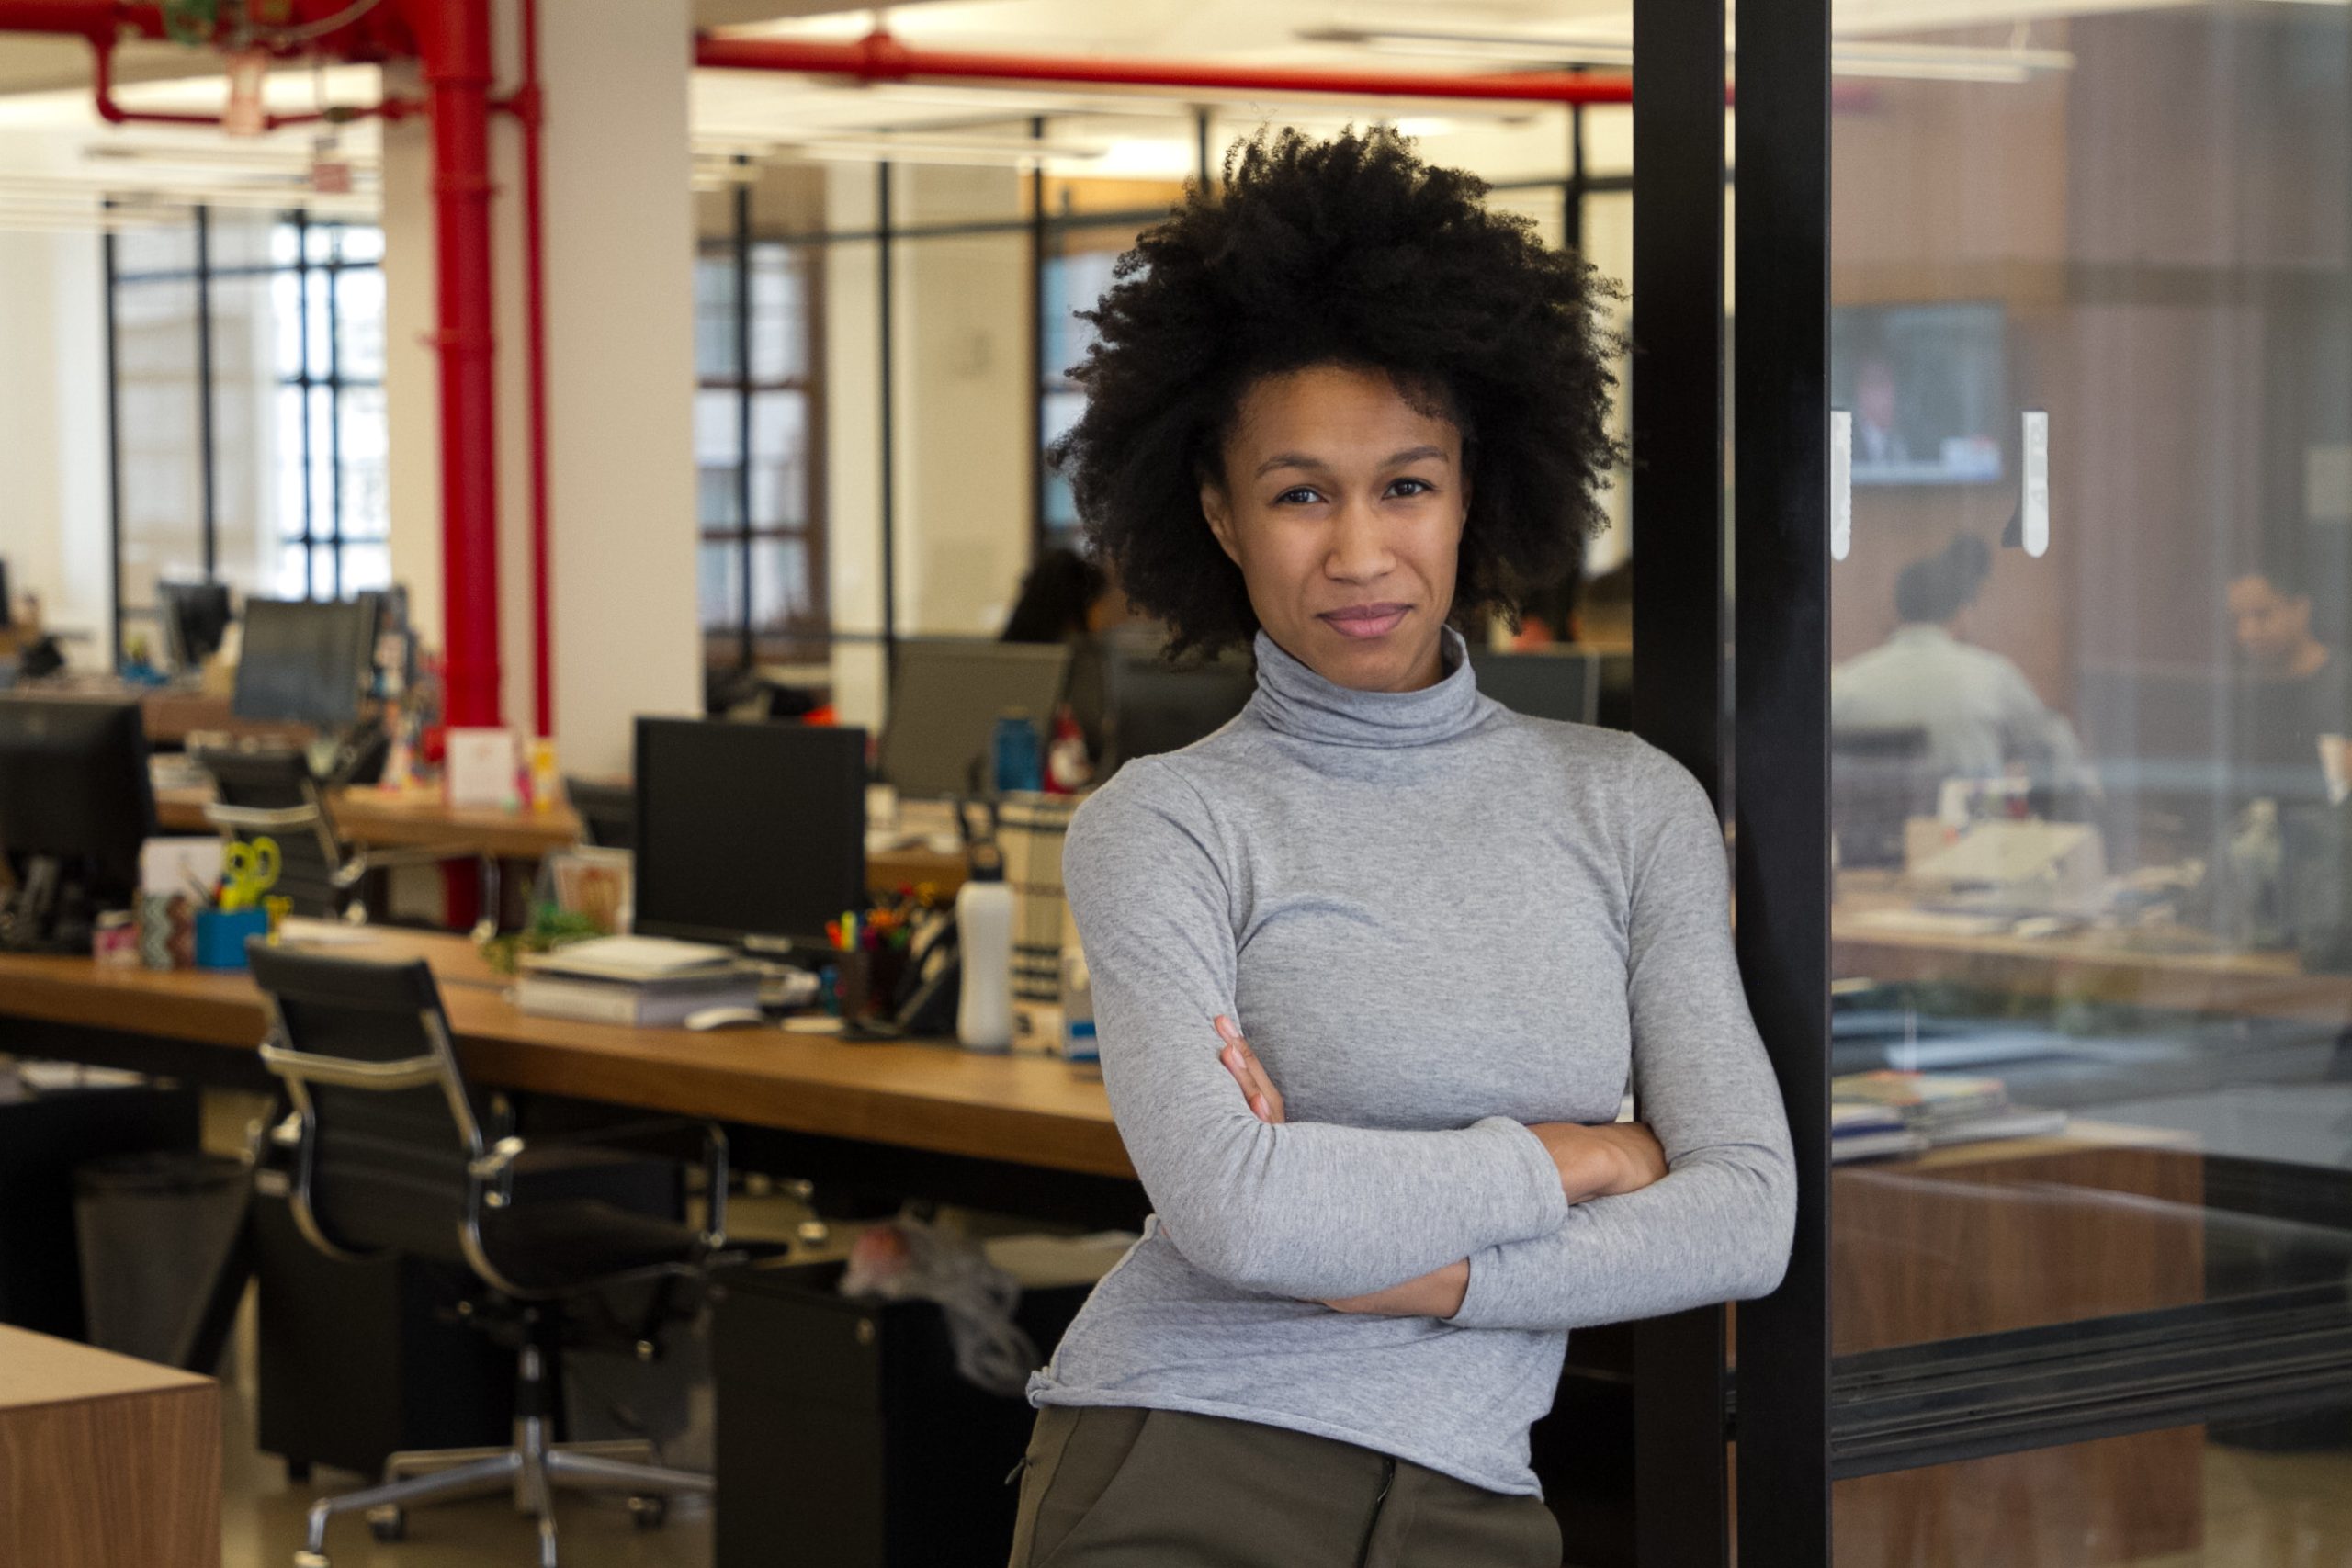 A black woman standing in an office.